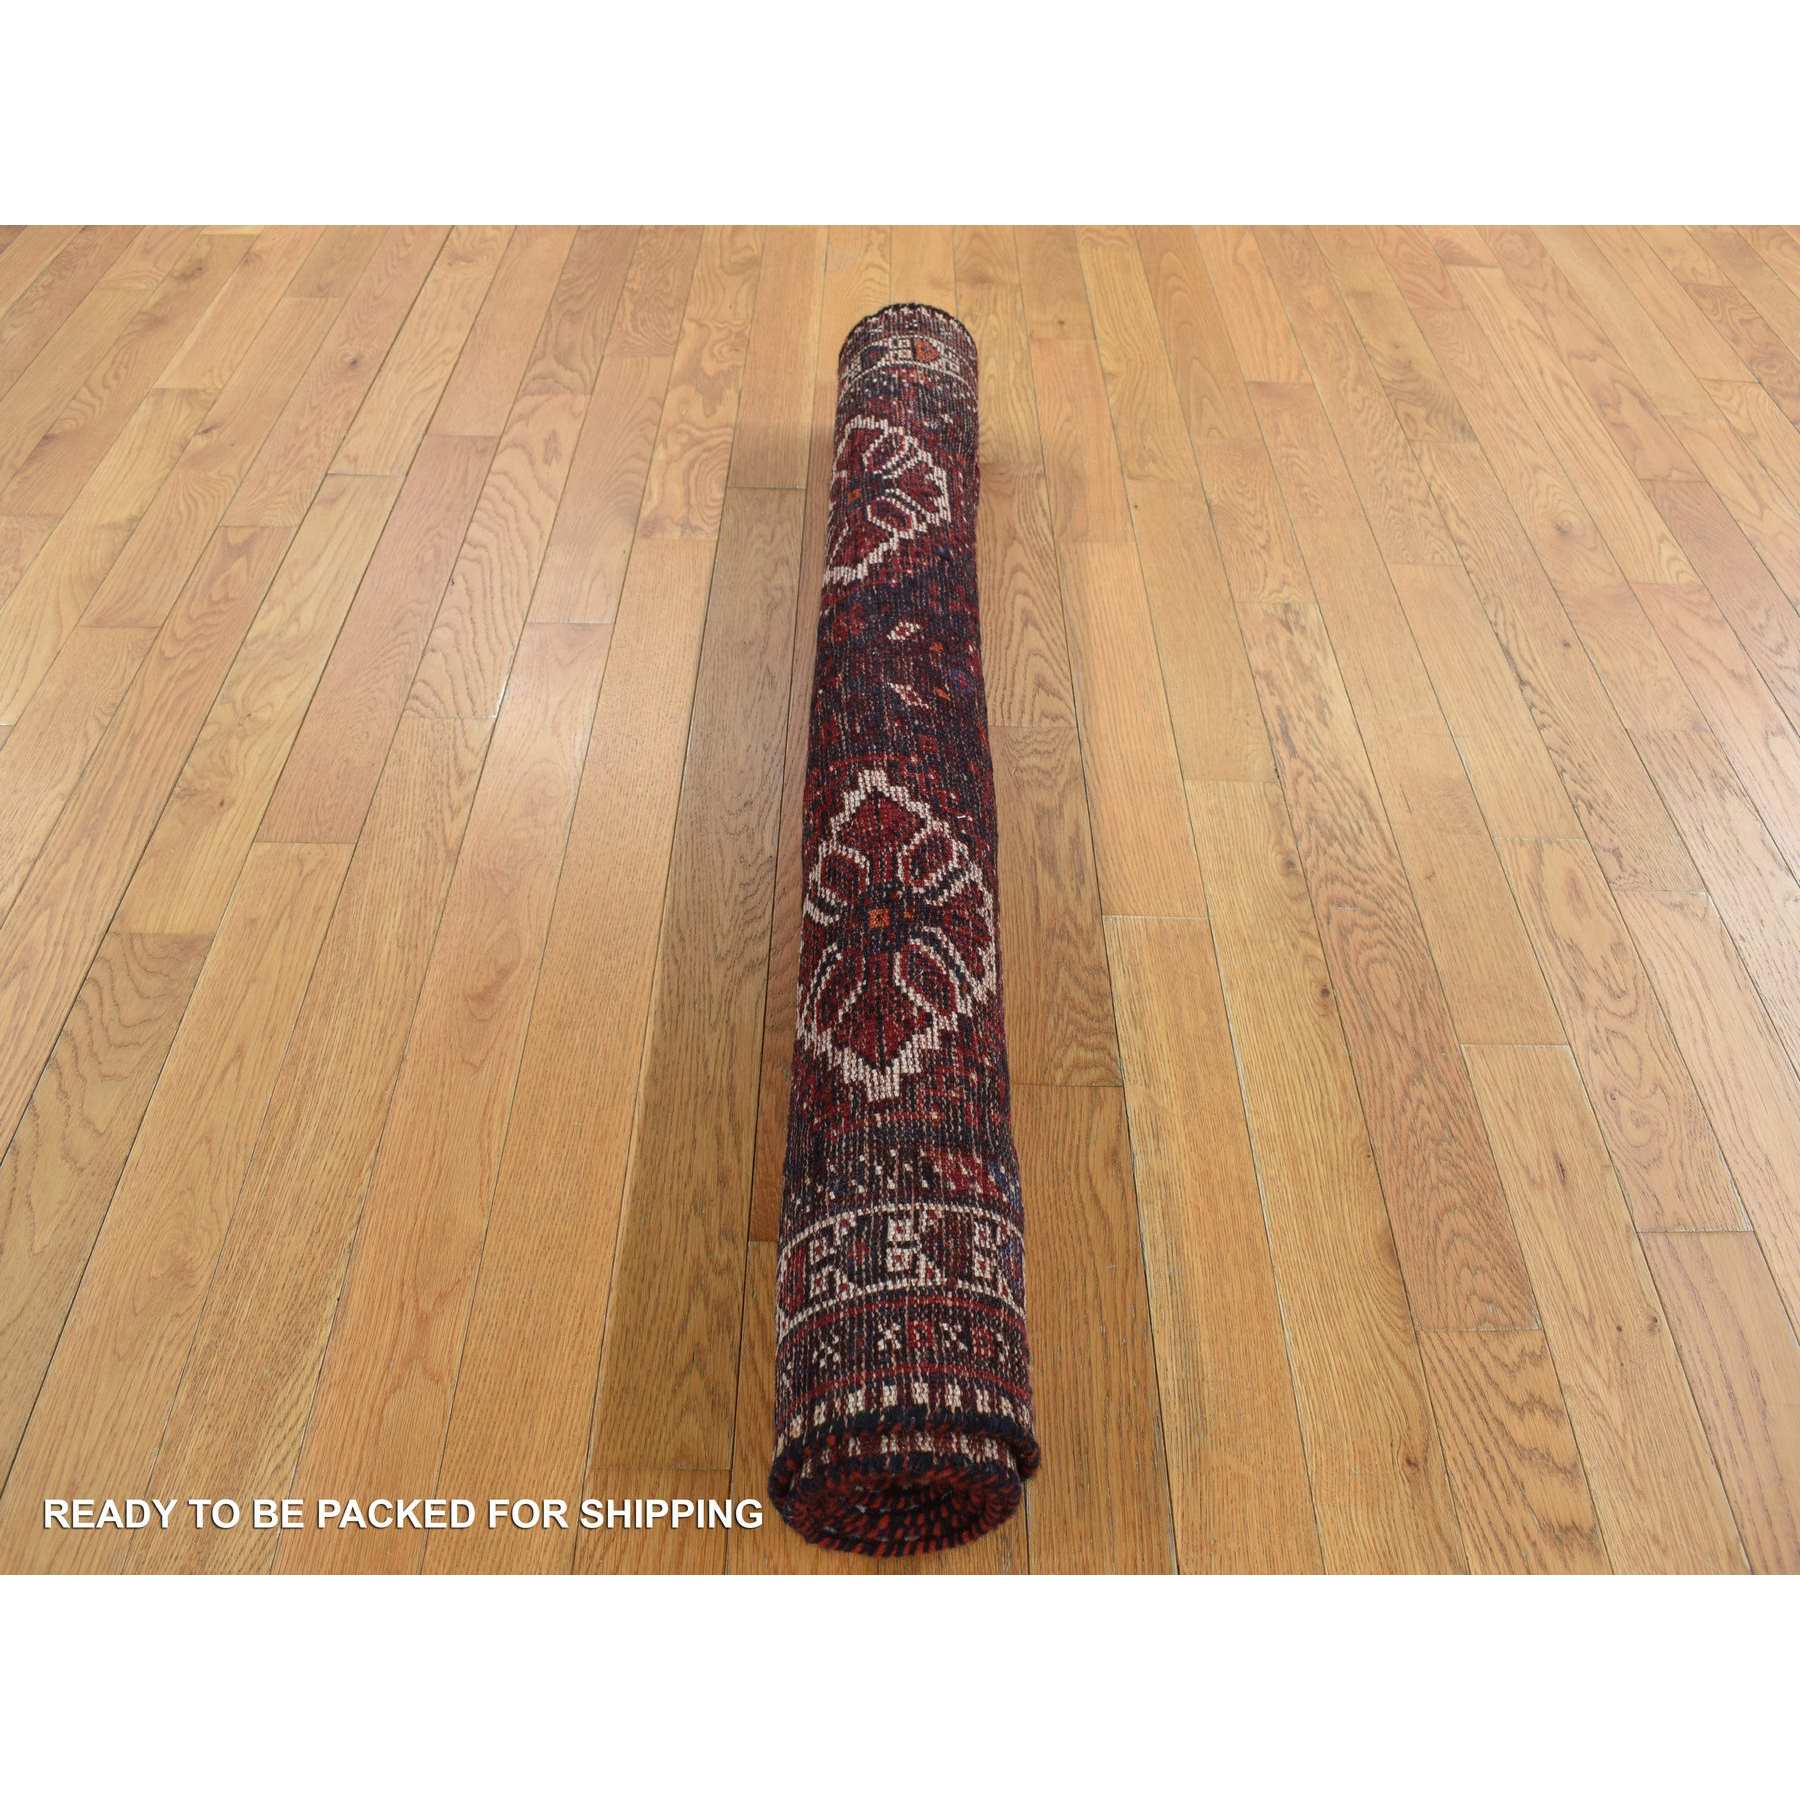 Persian-Hand-Knotted-Rug-437780